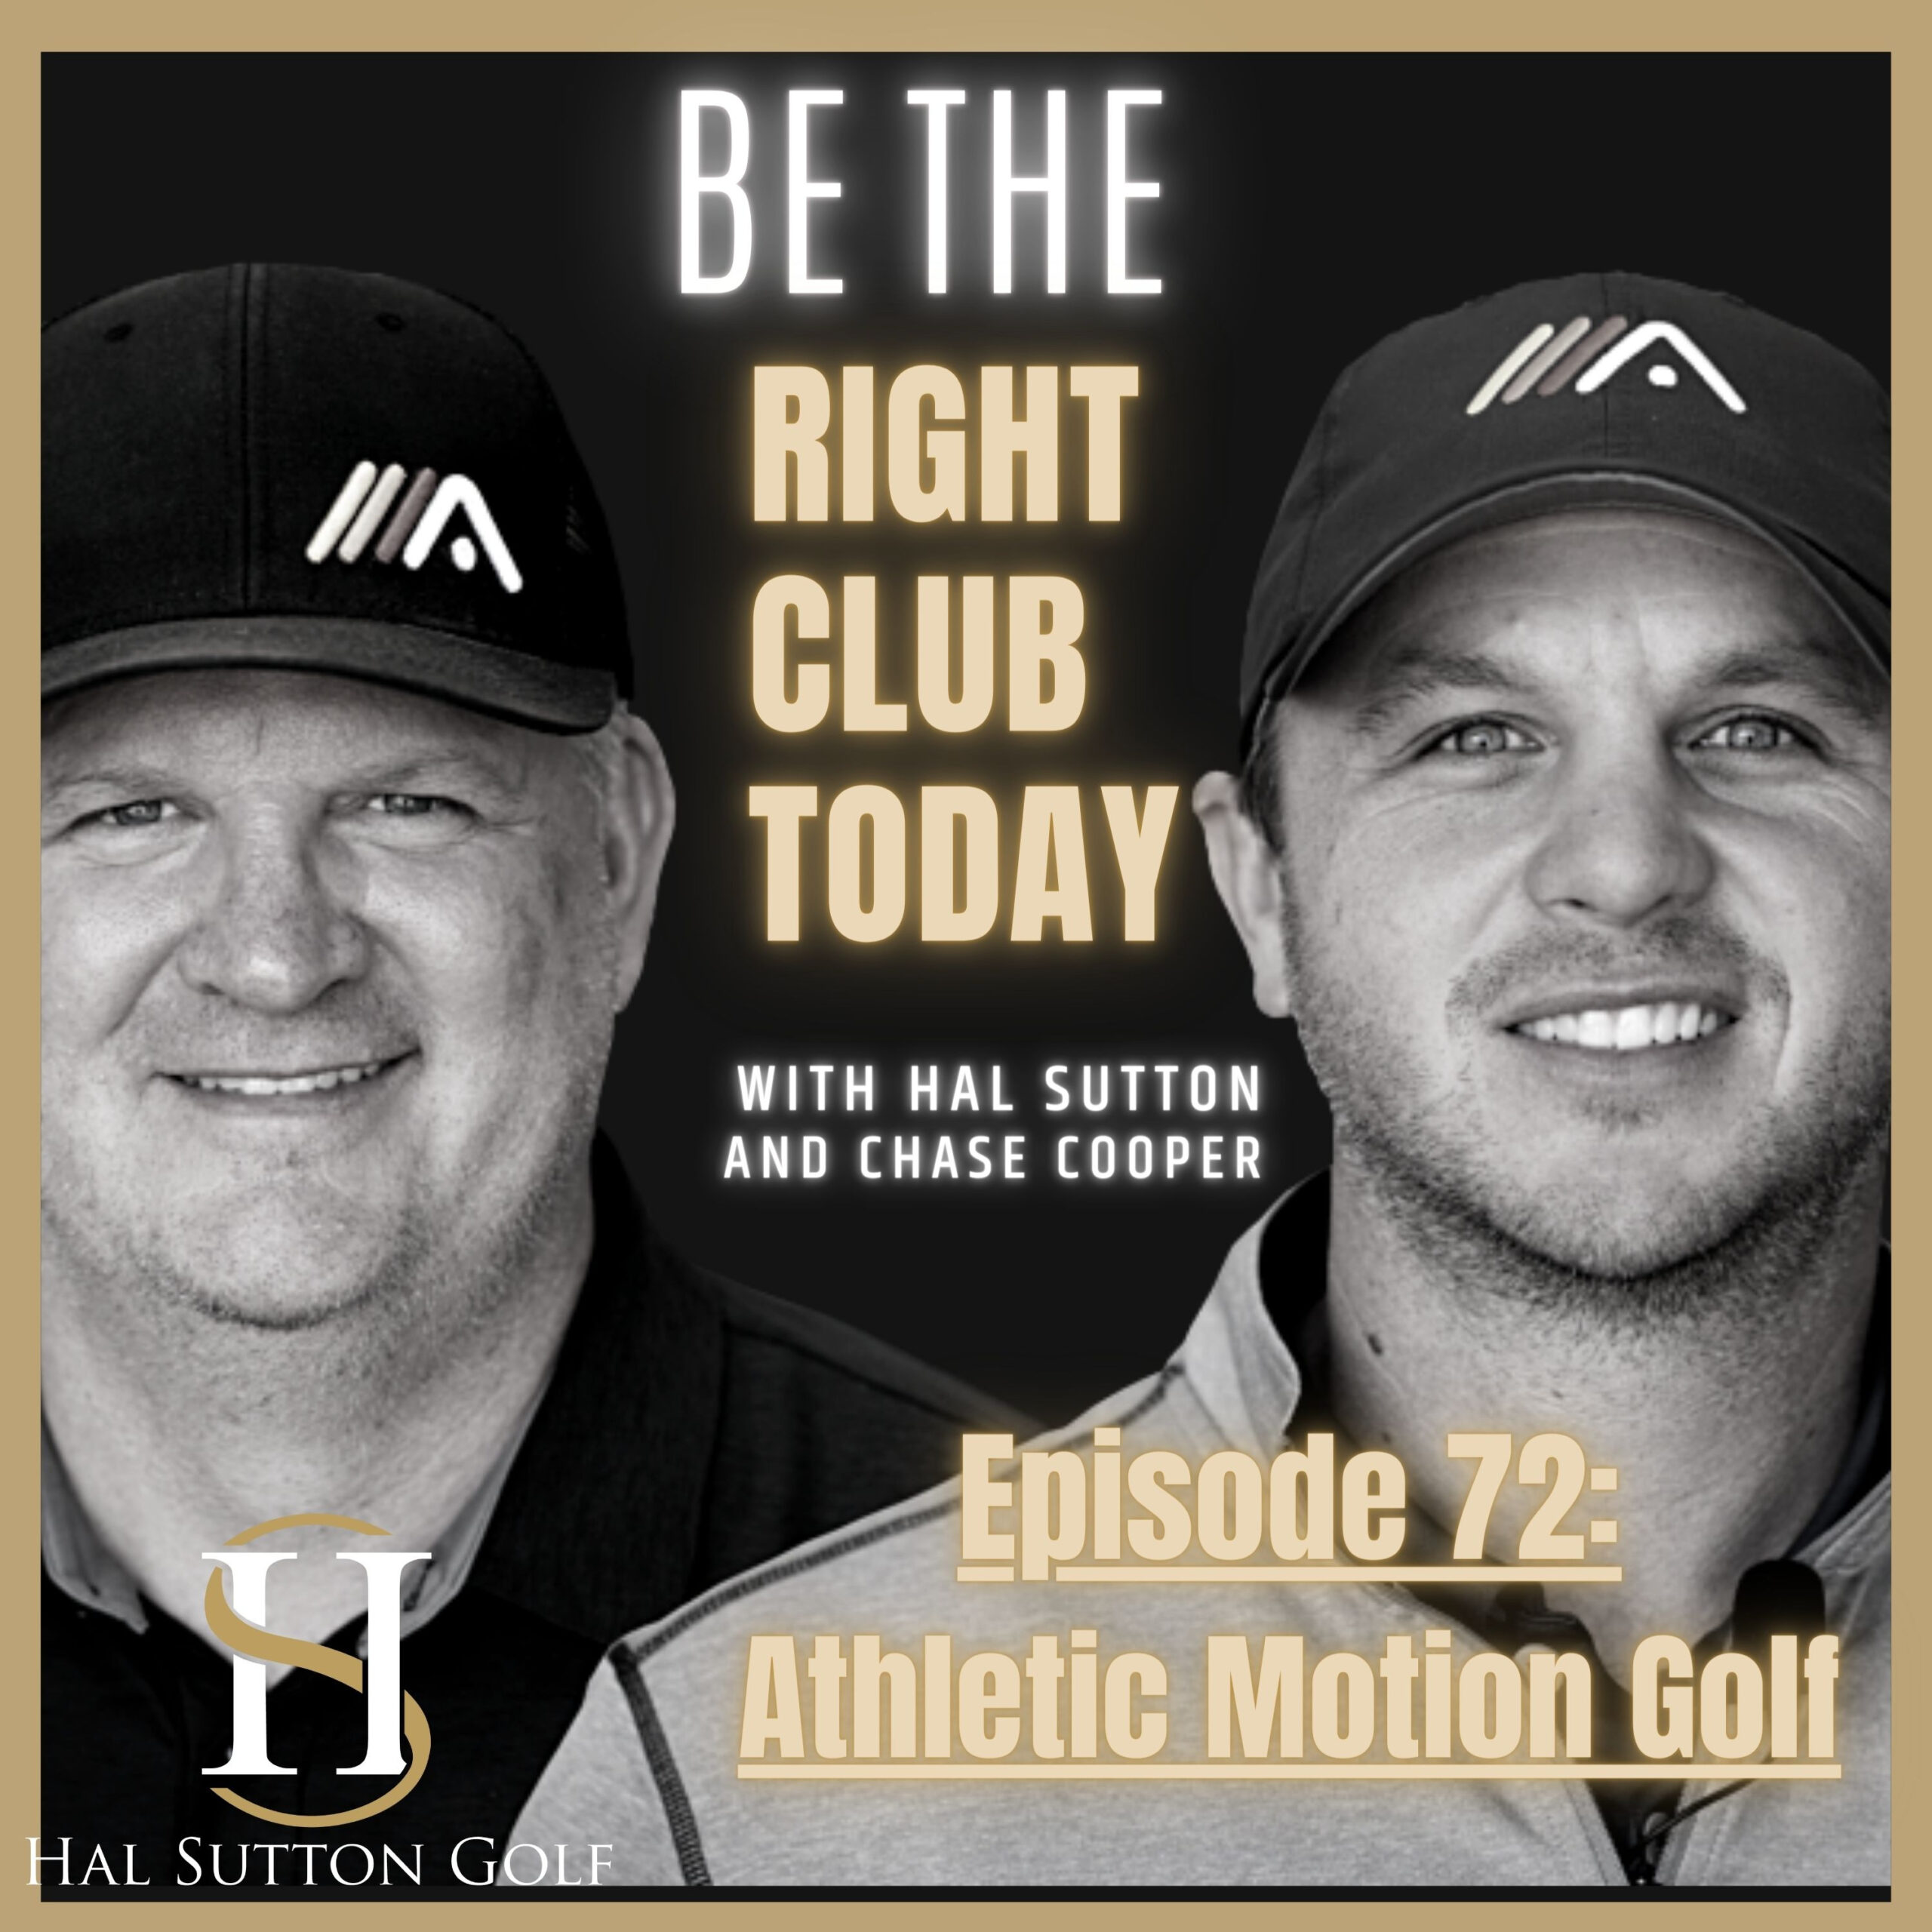 The Home of Athletic Motion Golf Club